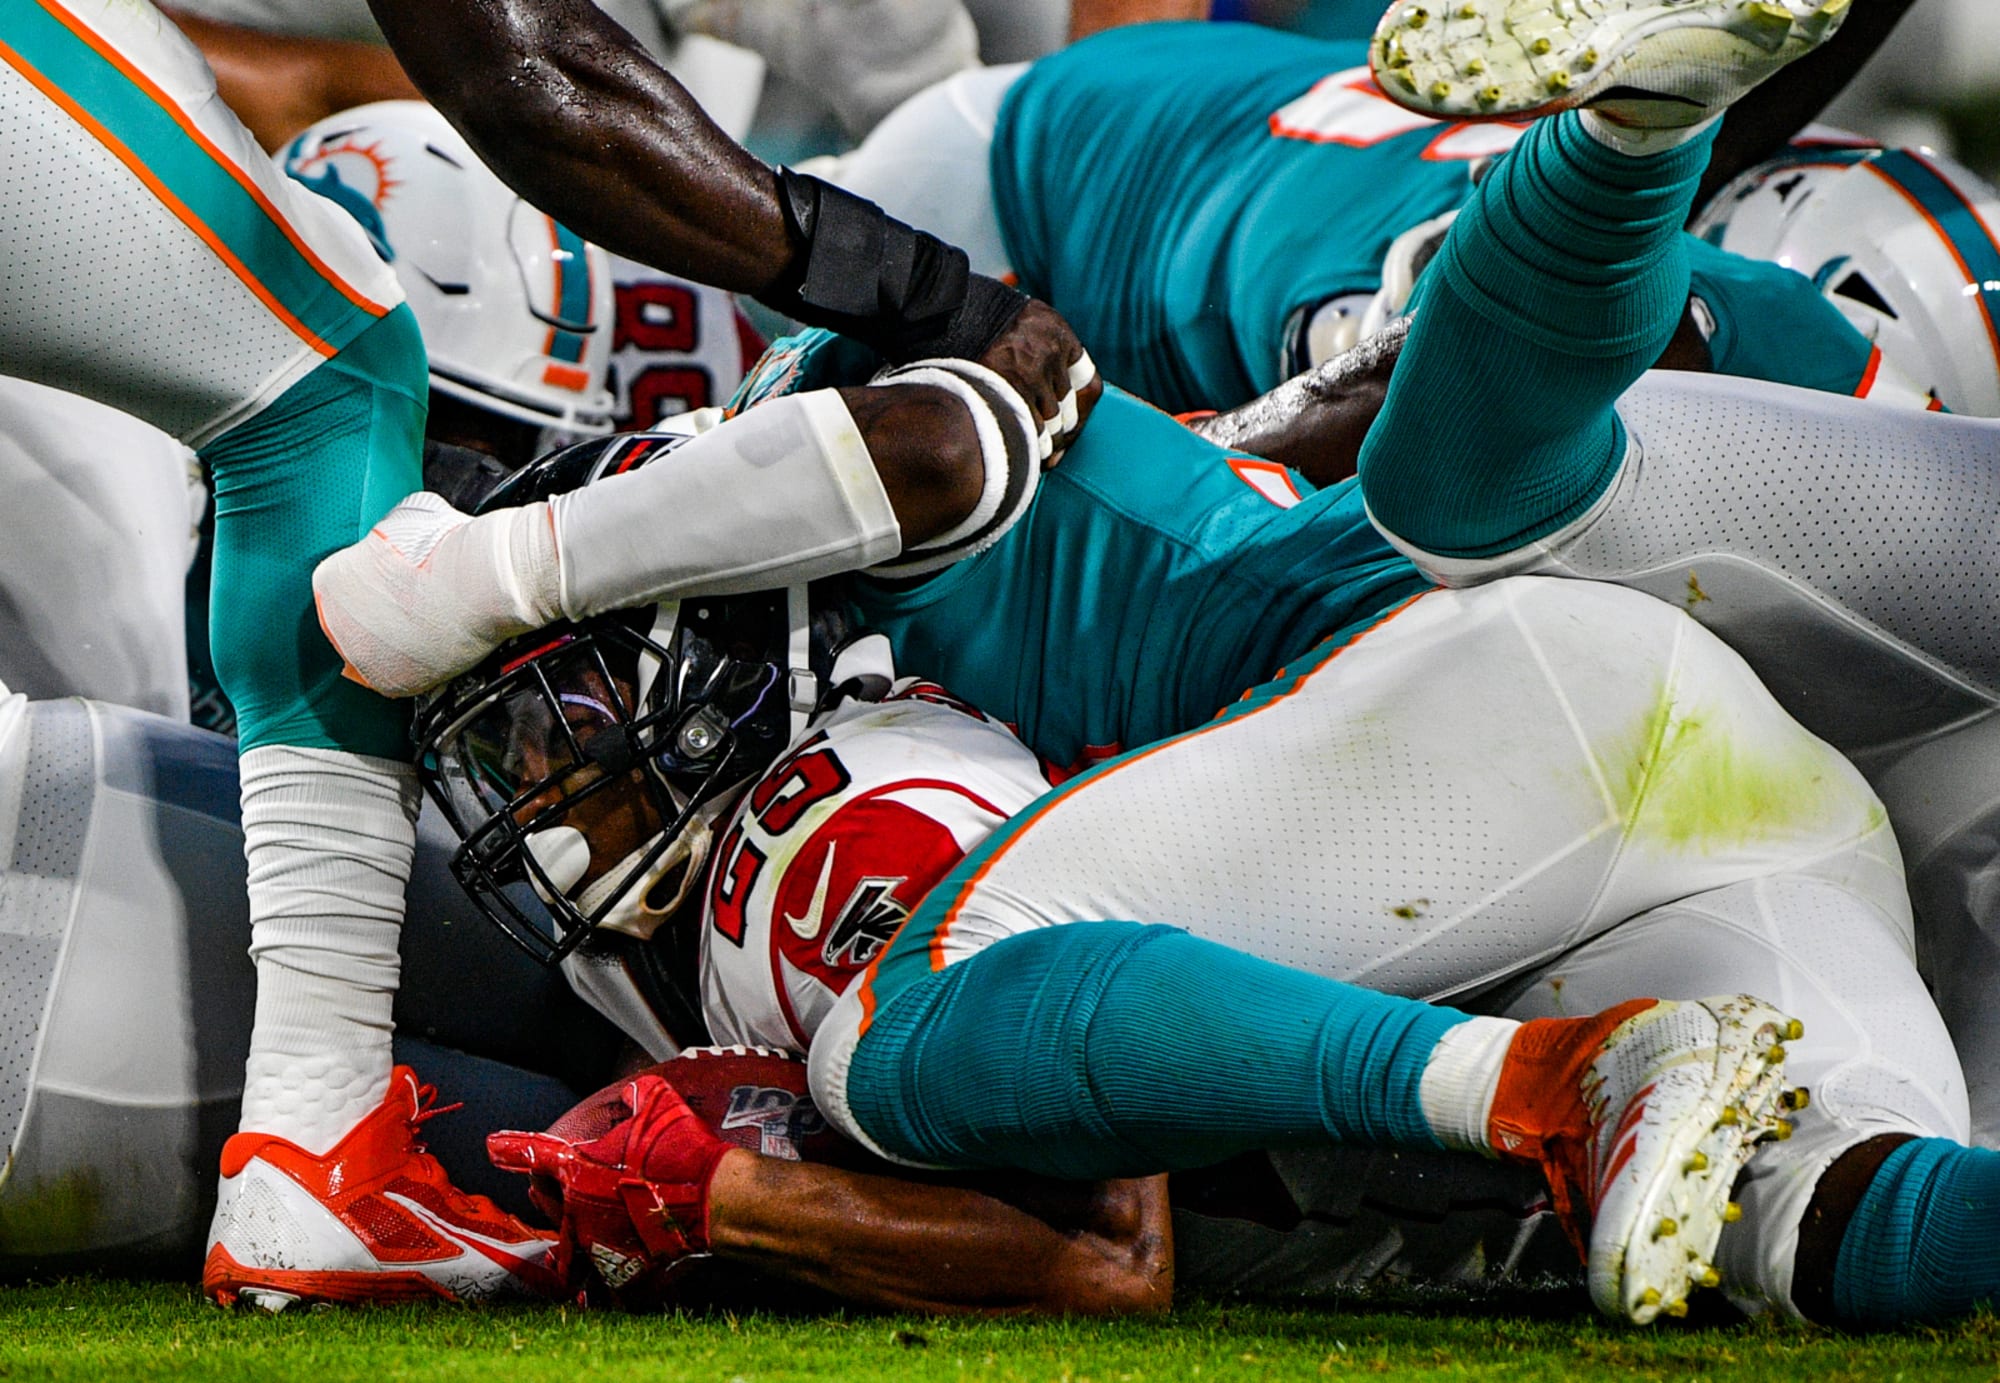 The two things that stood out the most in Miami Dolphins game